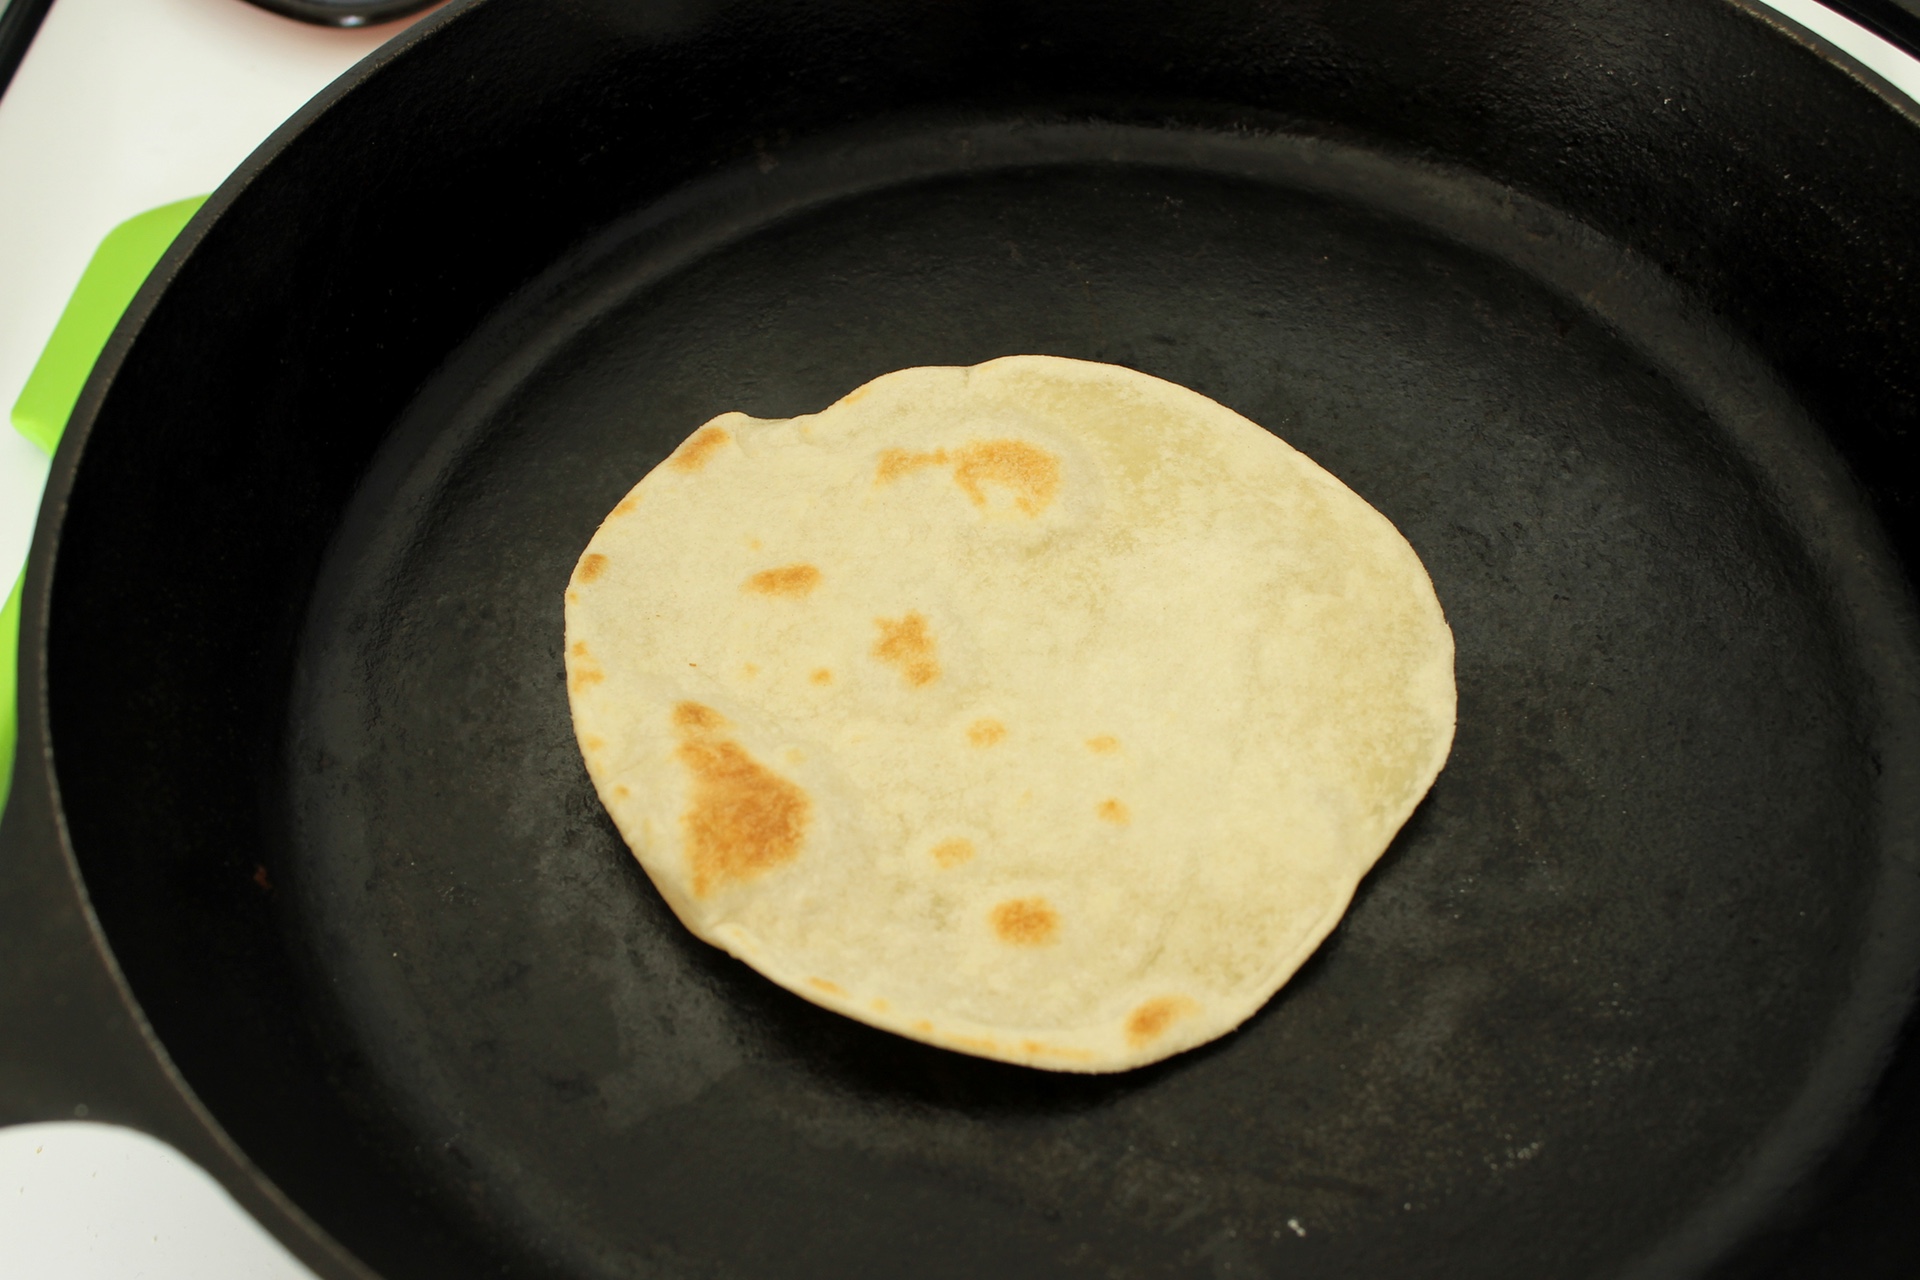 Each side of the tortilla should have golden brown spots.